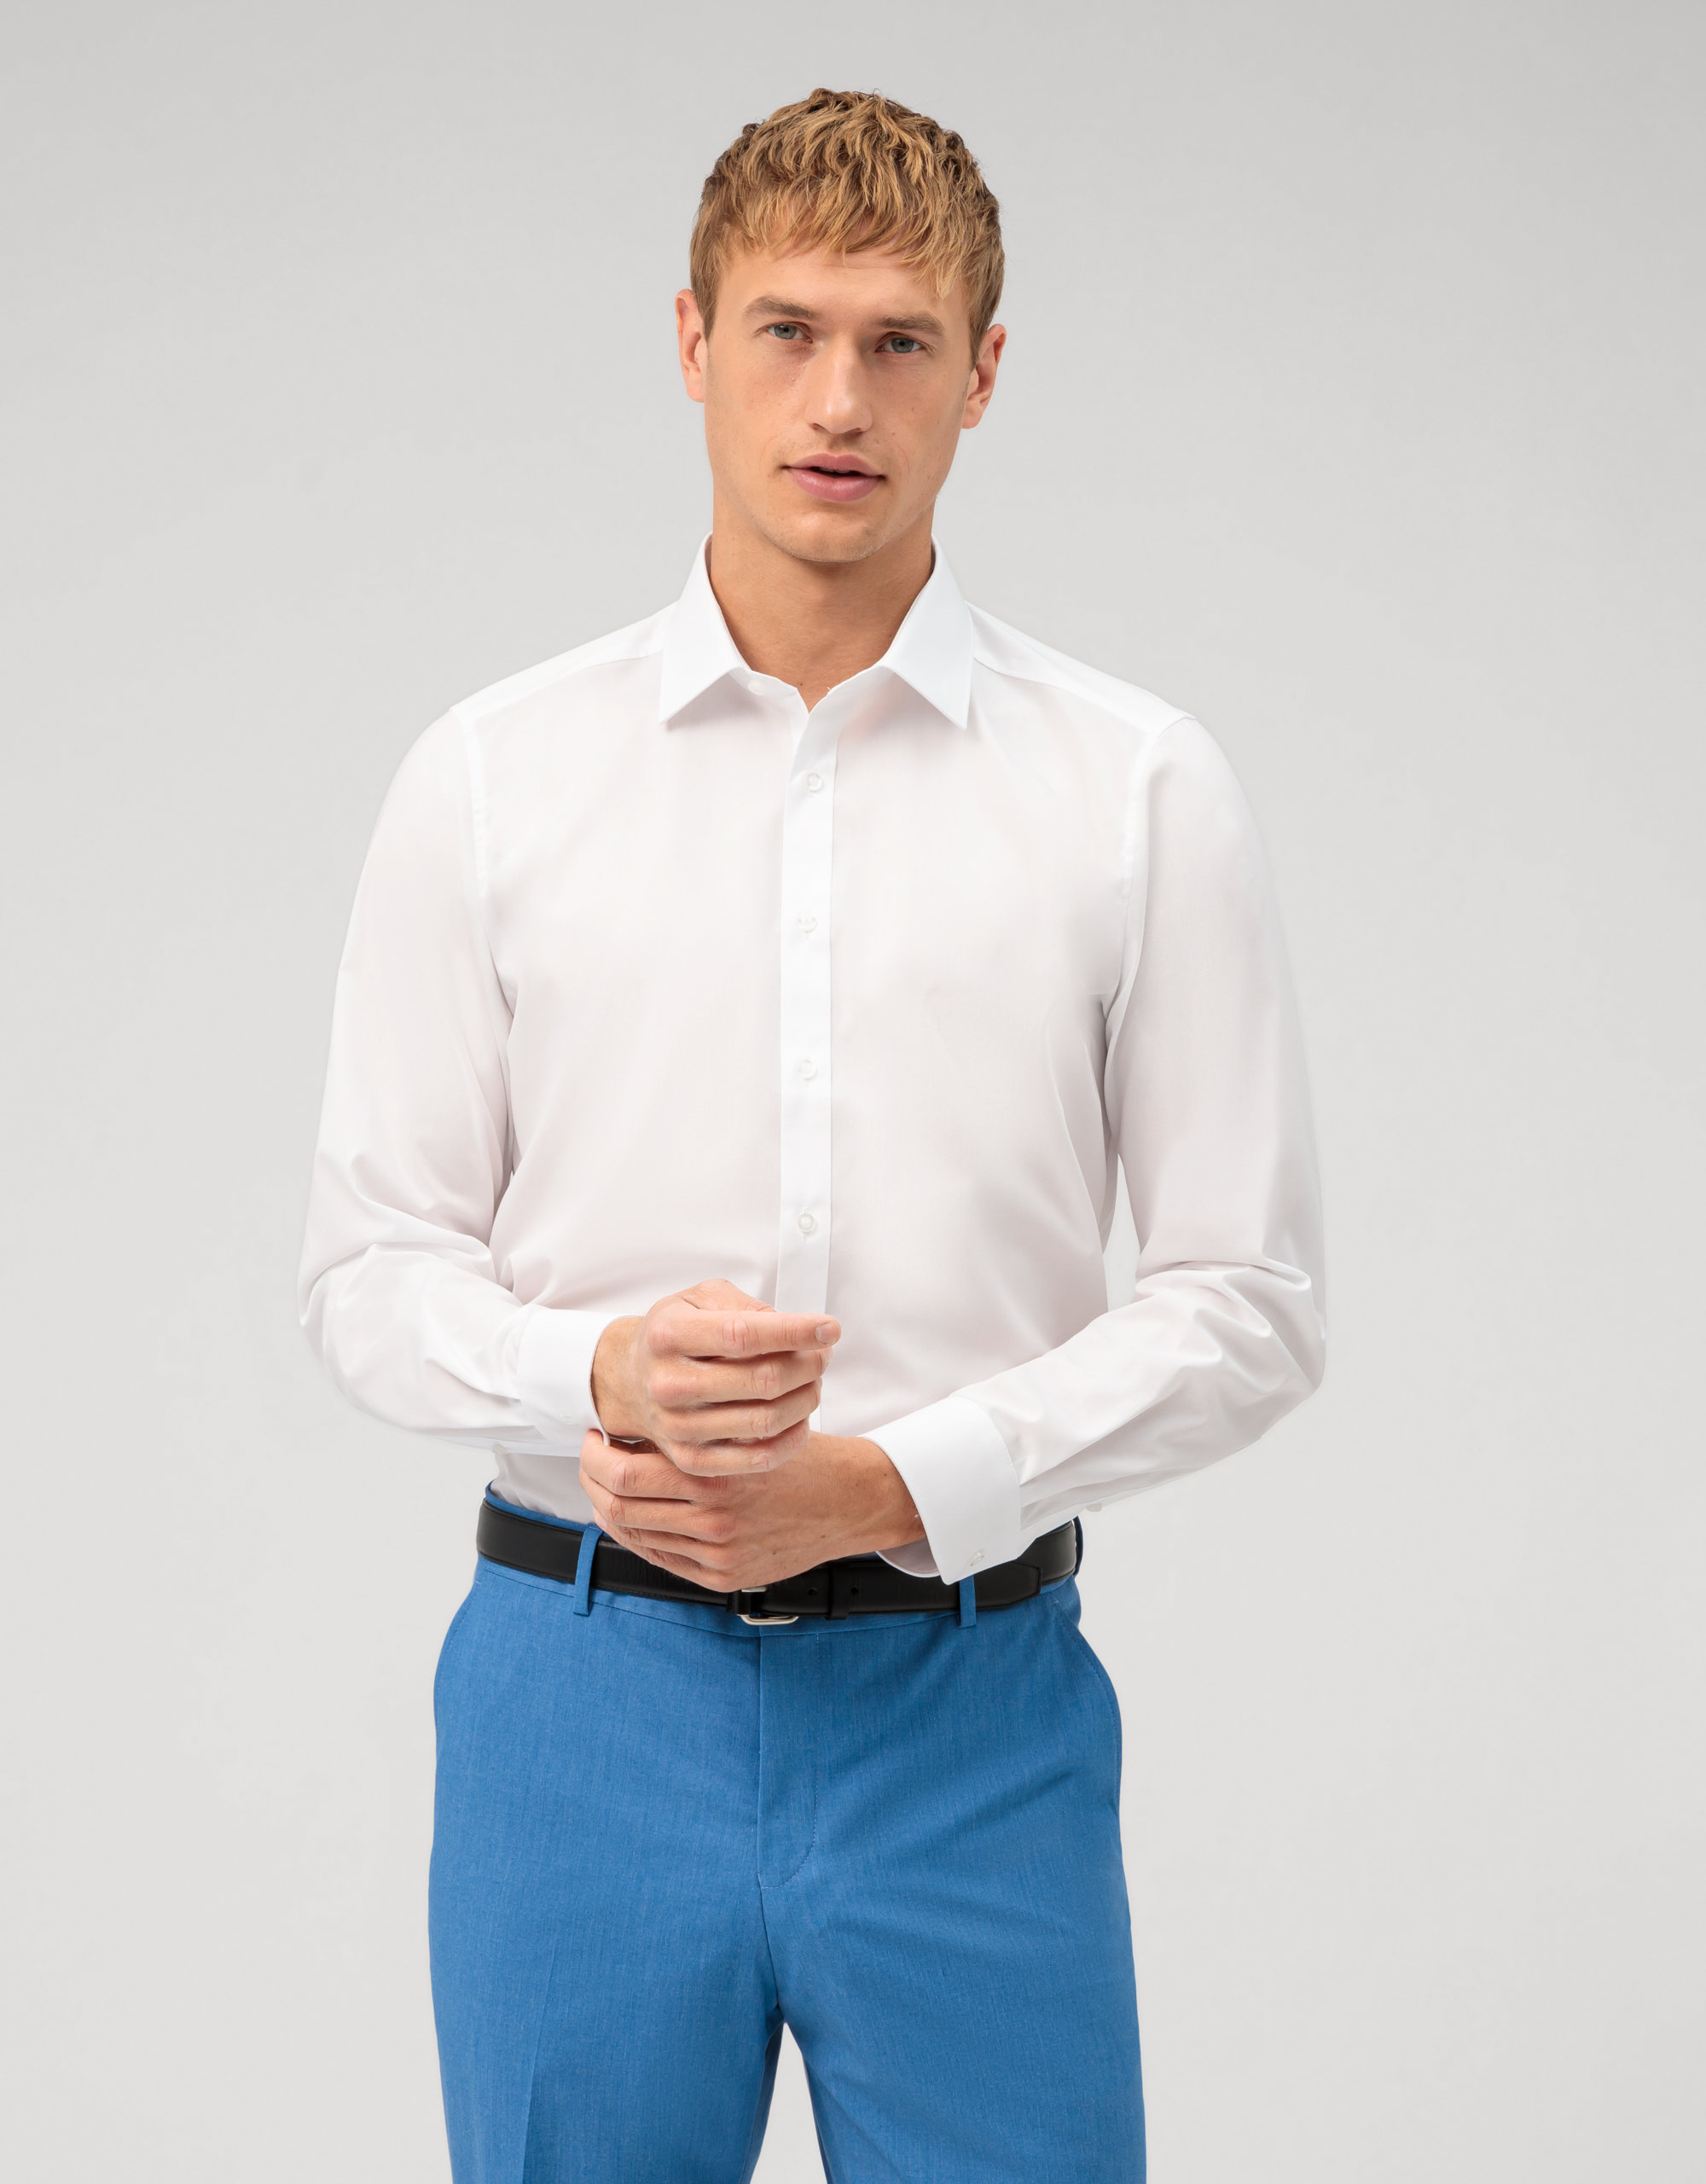 Business shirt | OLYMP Level fit, | White Kent York Five, body New - 60906900